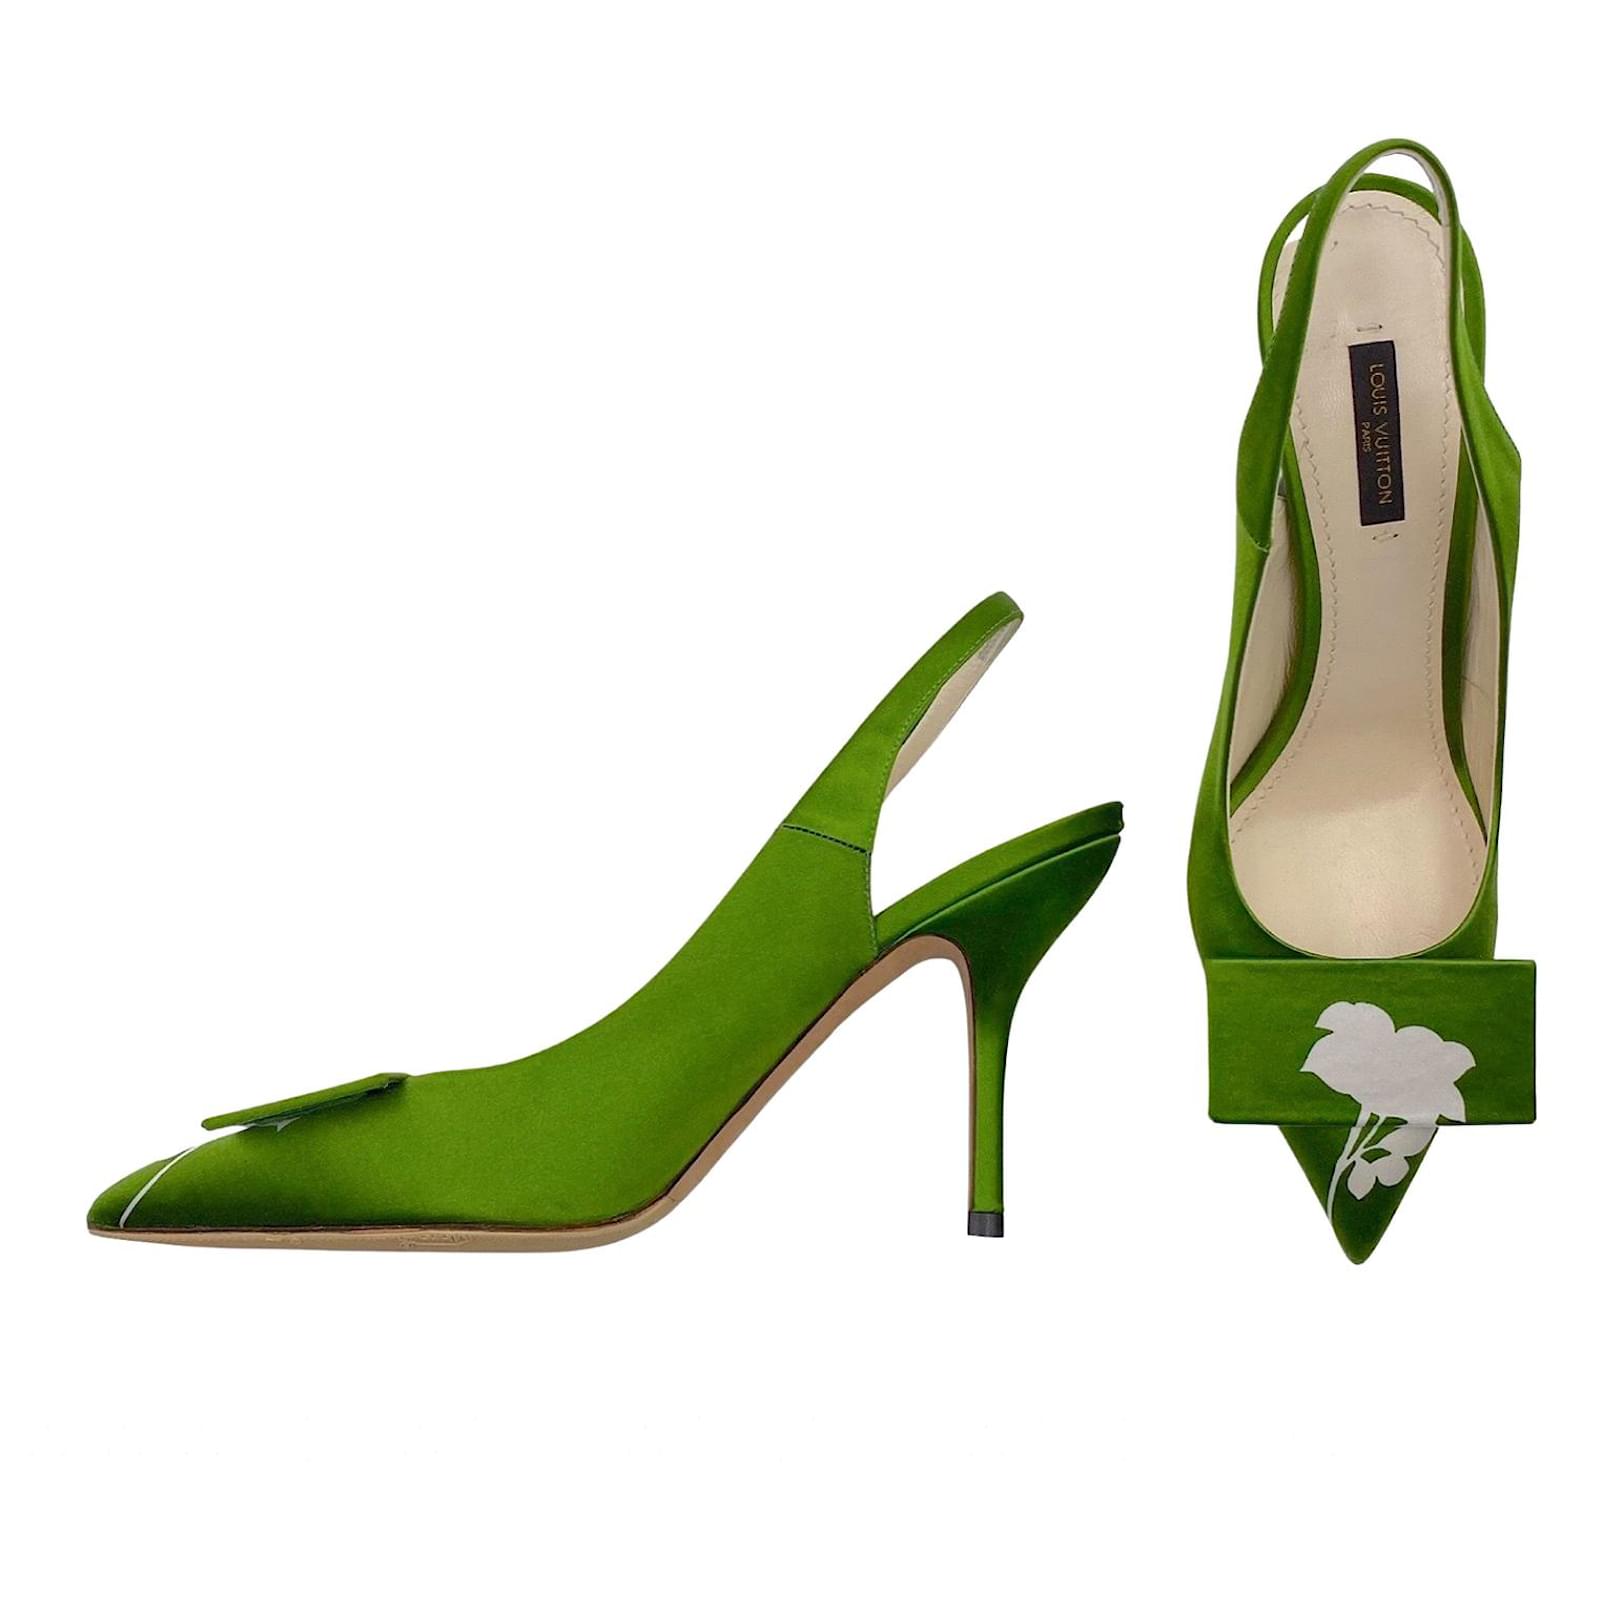 Louis Vuitton slingback pumps in green satin with white flower toe